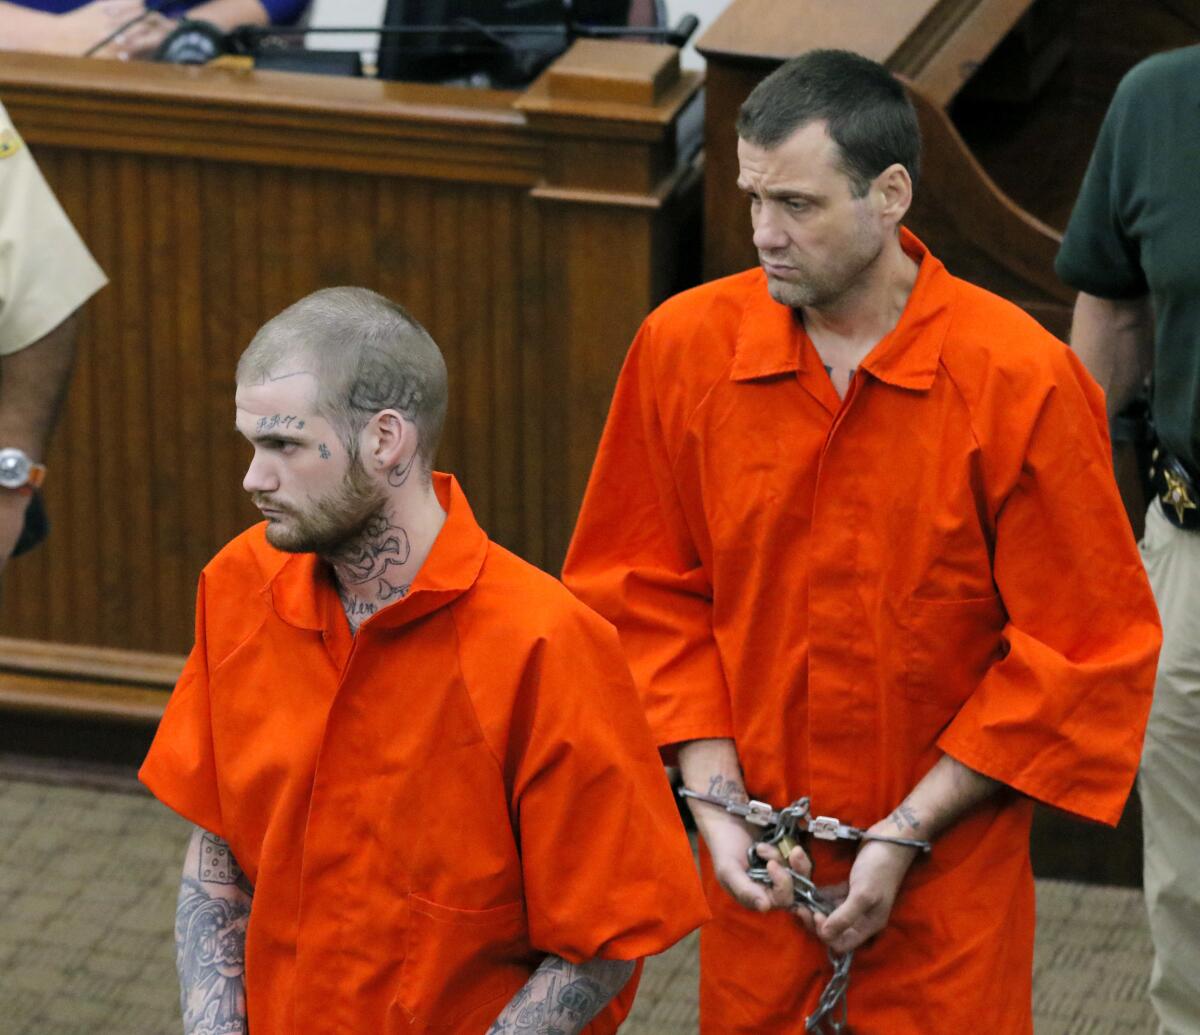 FILE - In this June 21, 2017, file photo, Ricky Dubose, left, and Donnie Russell Rowe enter the Putnam County courthouse in Eatonton, Ga. Dubose has been found guilty of murder on Monday, June 13, 2022, in the killings of two guards during an escape from a prison bus five years ago. Dubose and Donnie Rowe escaped together from the bus in Putnam County, southeast of Atlanta, and were arrested in Tennessee days later. Rowe was convicted last year of murder in the guards’ death. (Bob Andres/Atlanta Journal-Constitution via AP, Pool, File)